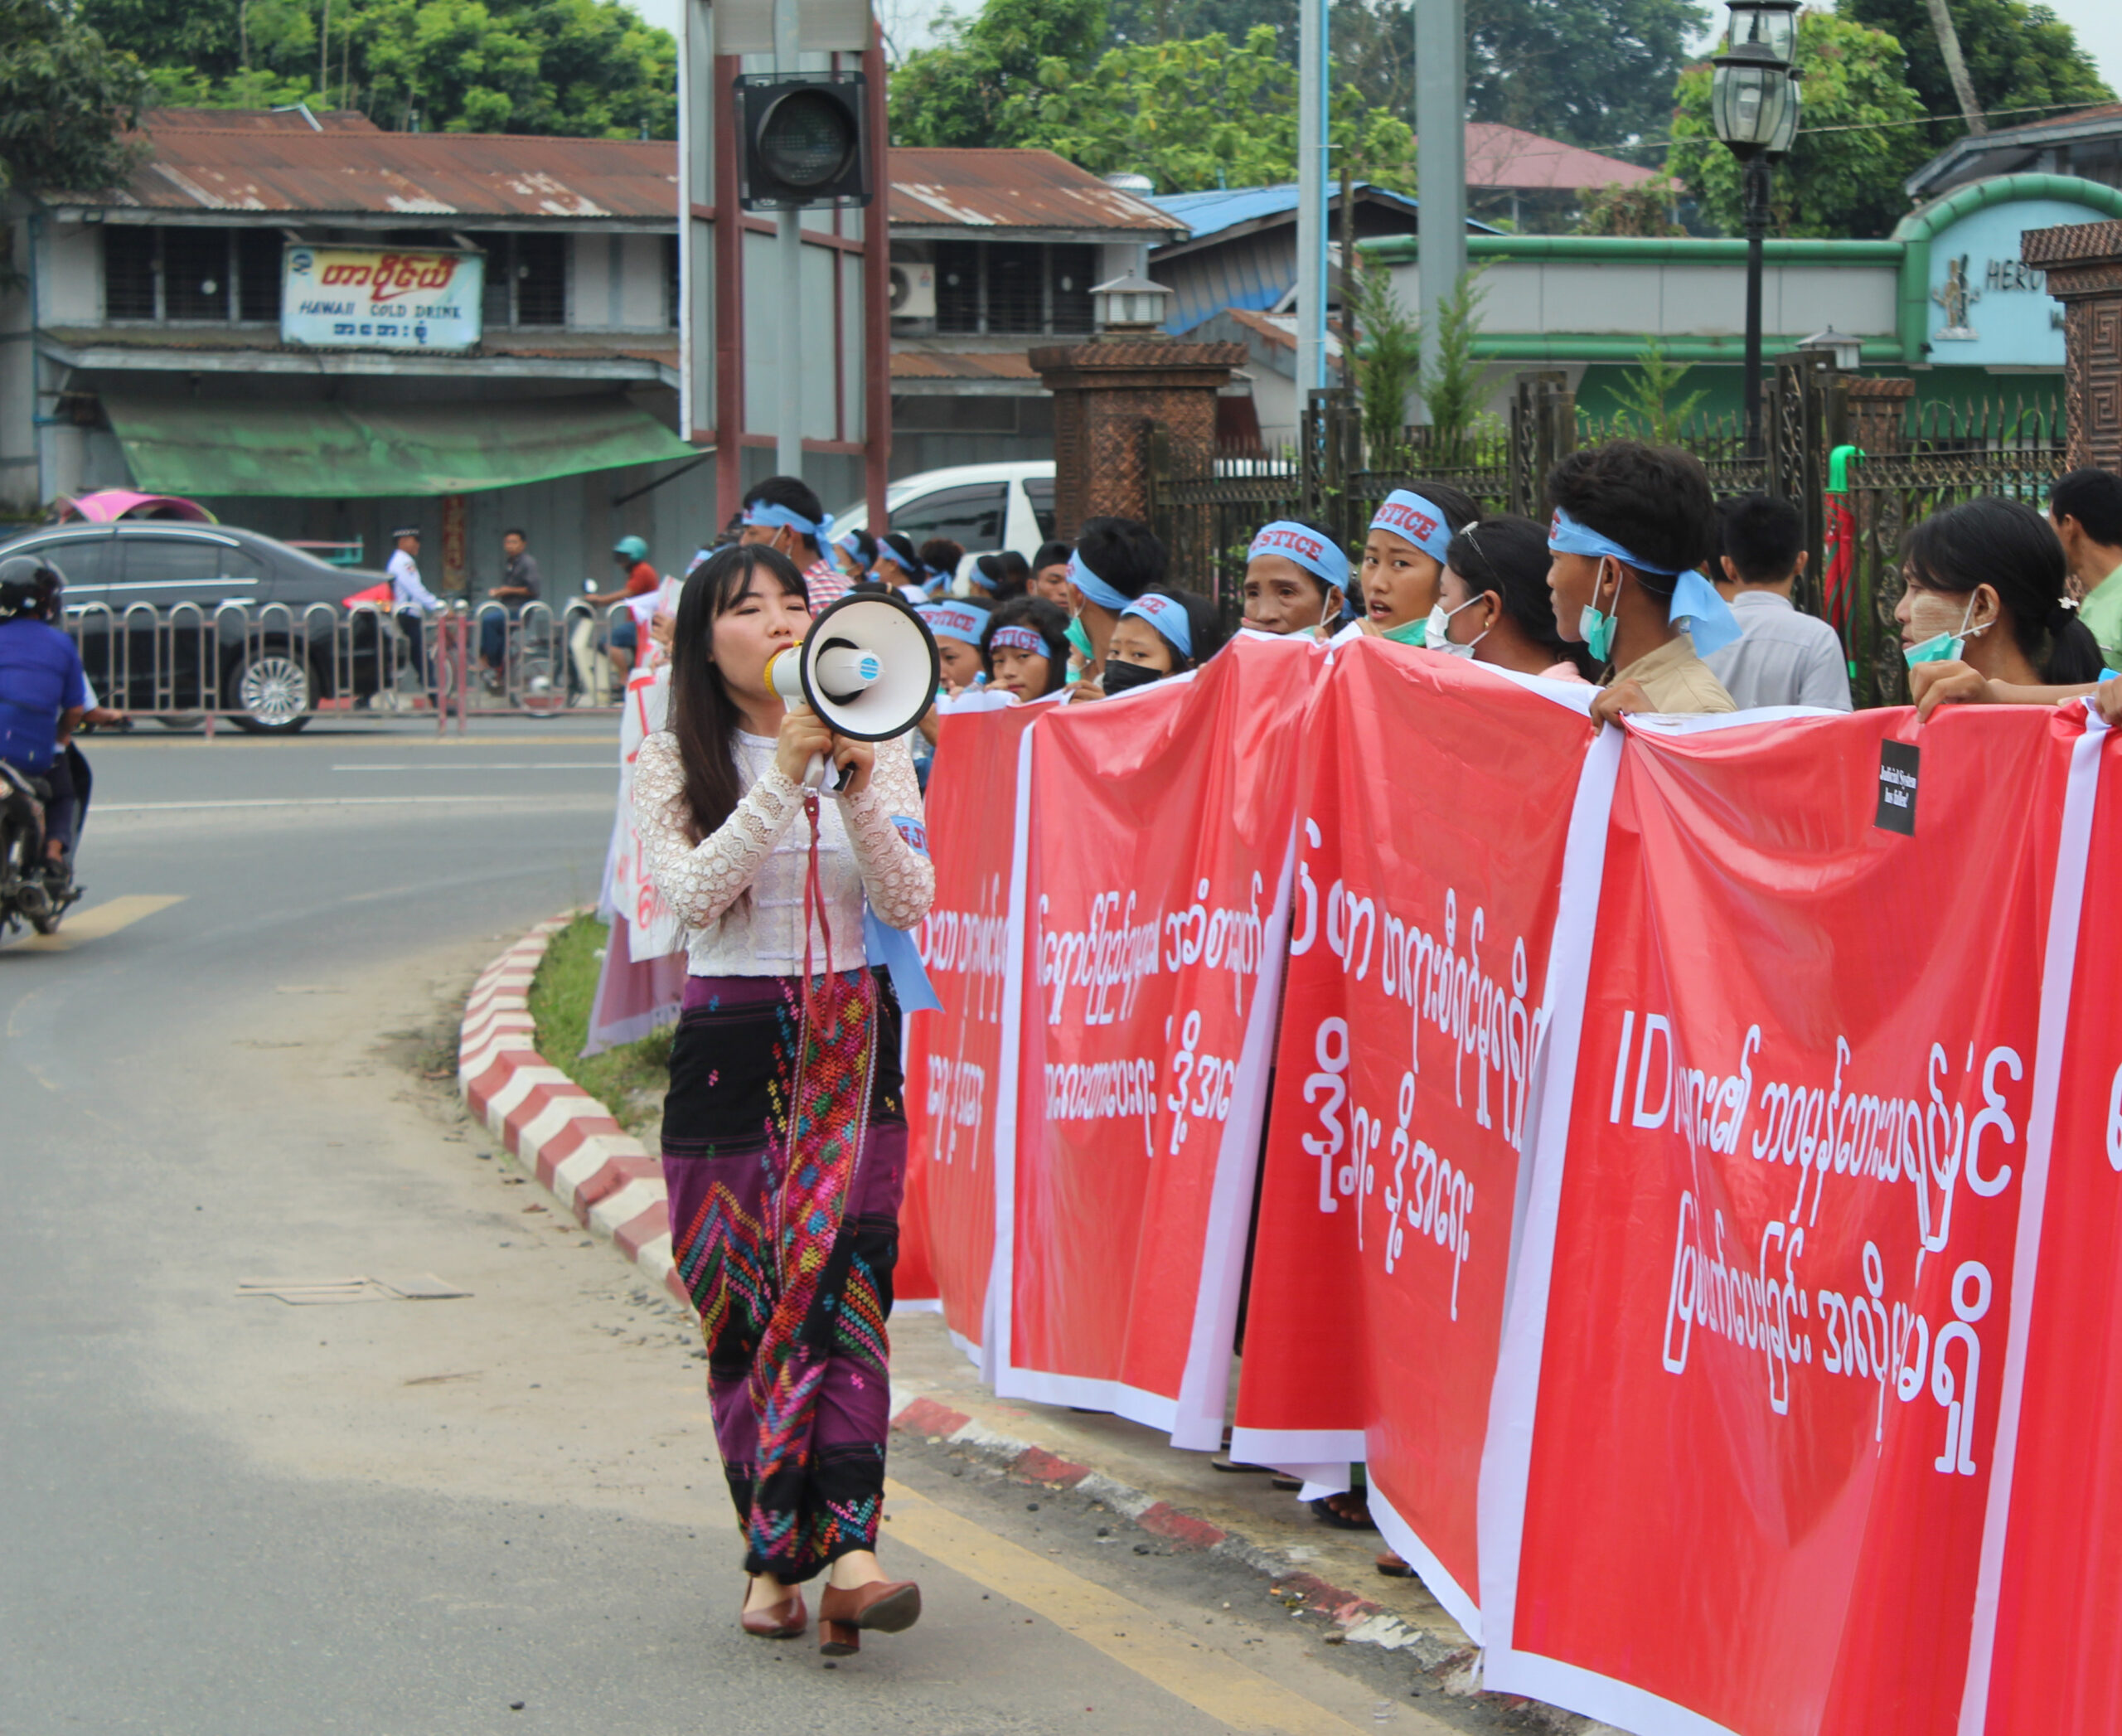 Kachin activist Sut Seng Htoi at a protest in the Kachin State capital, Myitkyina in September 2019. (Emily Fishbein | Frontier)